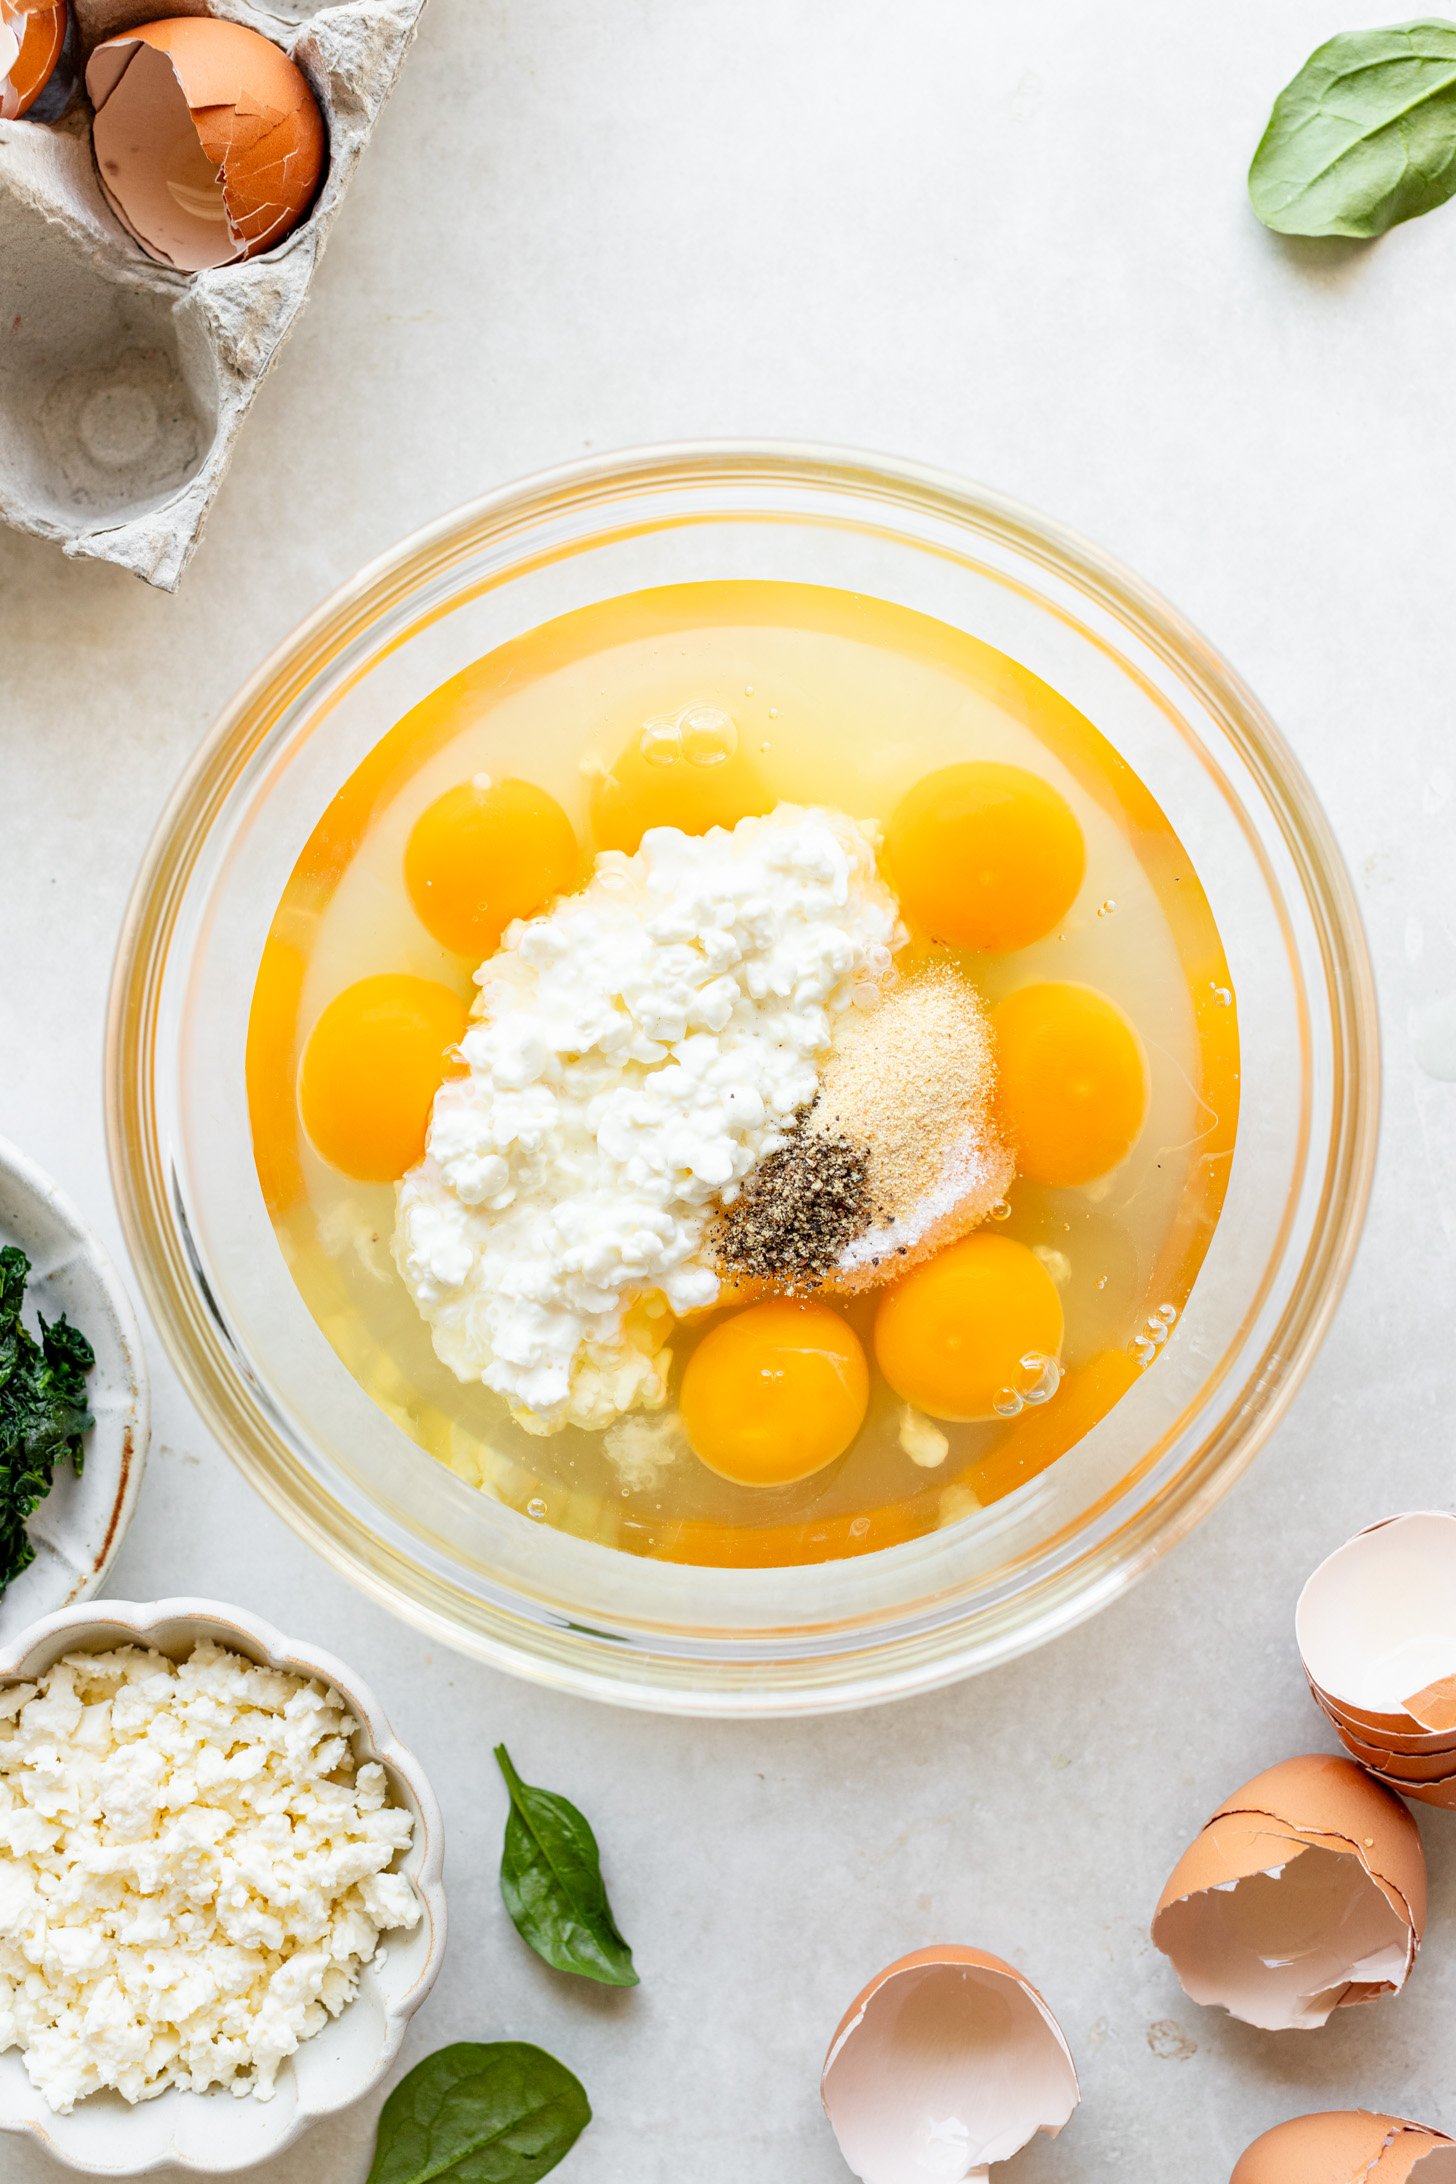 Eggs, cottage cheese, salt, pepper, and garlic powder in a glass bowl. There are egg shells and spinahc leaves and a bowl of feta on the table next to it. 